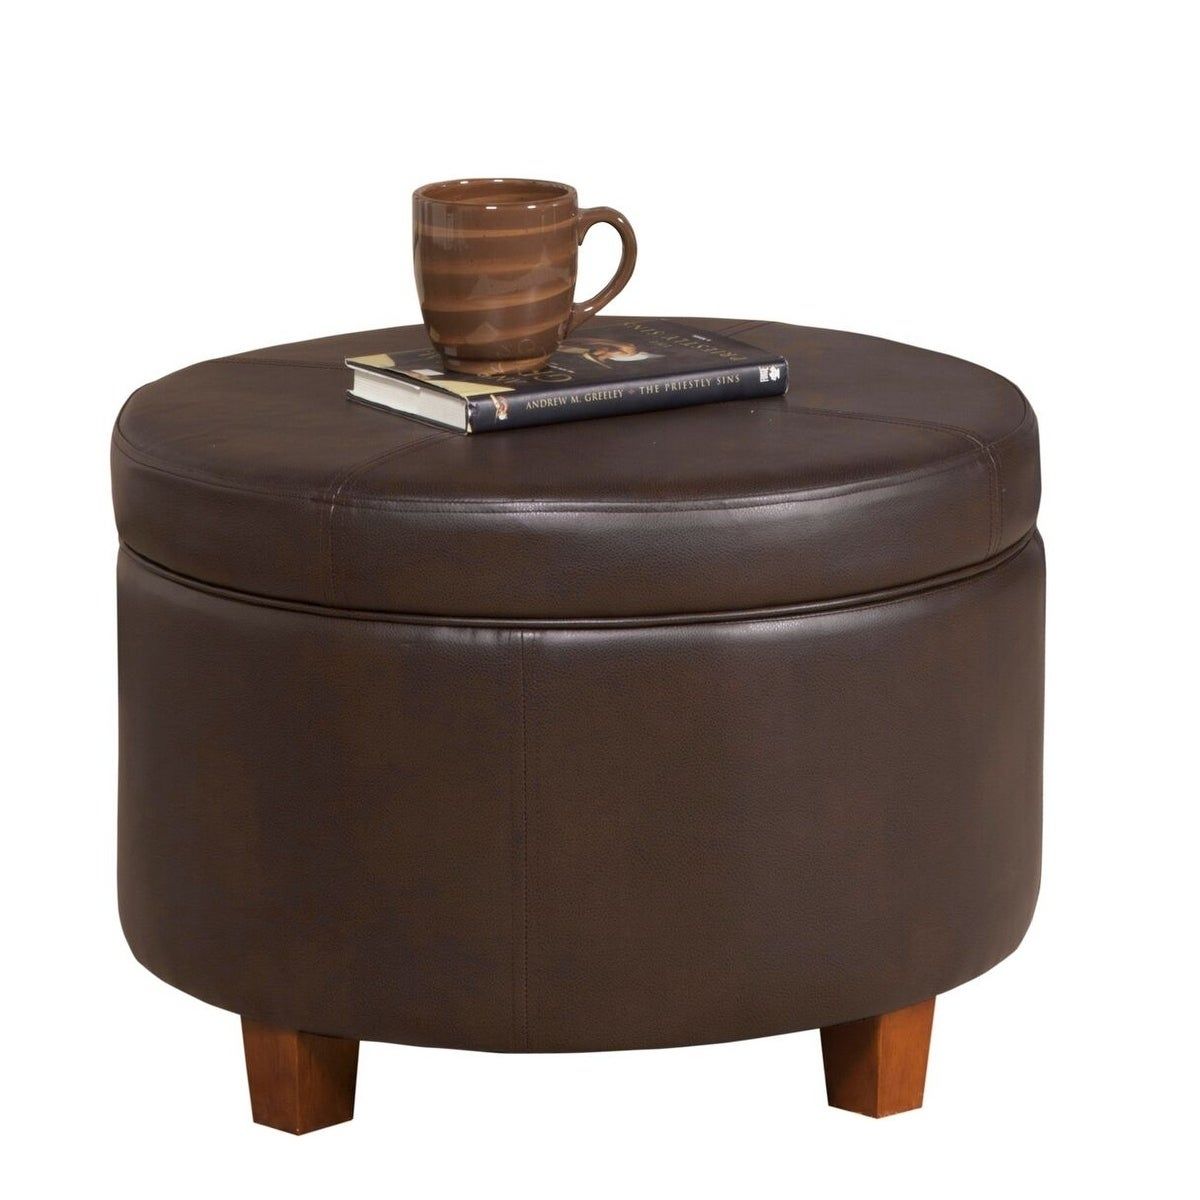 Porch & Den Rockwell Chocolate Brown Faux Leather/foam/wood Large Round Intended For Brown Faux Leather Tufted Round Wood Ottomans (View 12 of 20)